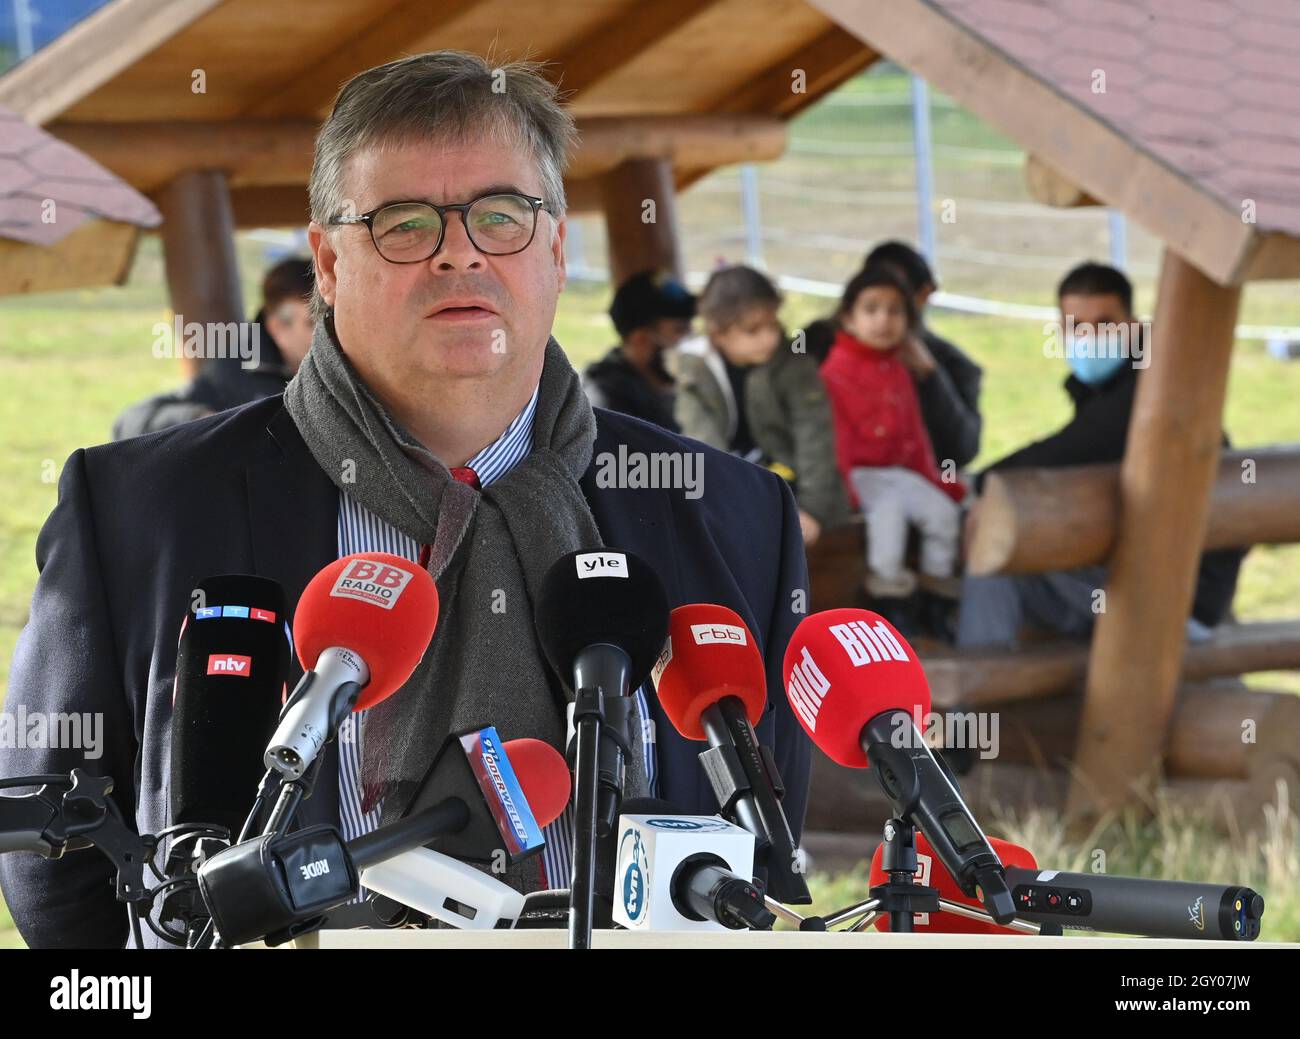 06 October 2021, Brandenburg, Eisenhüttenstadt: Olaf Jansen, head of the Central Foreigners Authority of Brandenburg, speaks at a press conference at the Central Initial Reception Facility for Asylum Seekers (ZABH) of the state of Brandenburg. In the wake of the significant increase in the registration of migrants in Brandenburg, the Minister of the Interior of Brandenburg, Stübgen (CDU), informed himself about the current situation on site. Photo: Patrick Pleul/dpa-Zentralbild/ZB Stock Photo